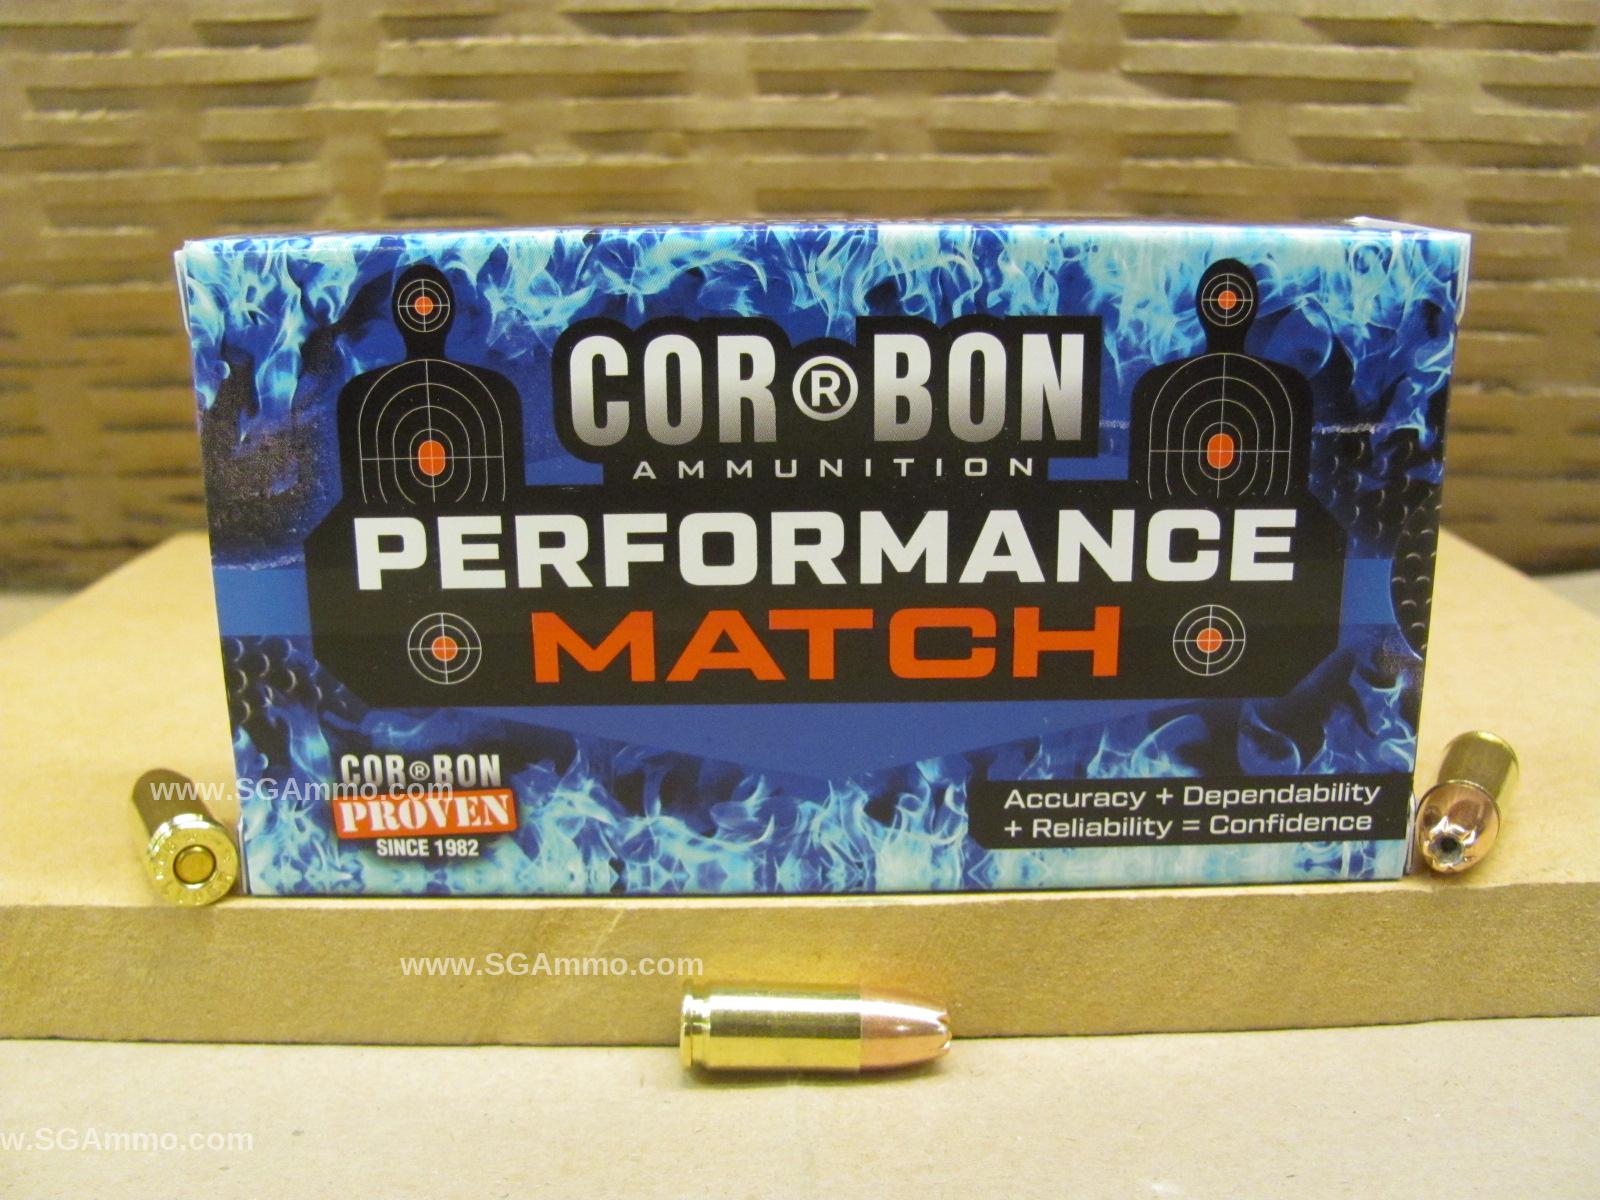 1250 Round Case - 9mm Luger 147 Grain Jacketed Hollow Point Subsonic Corbon Performance Match Ammo - PM09S14750